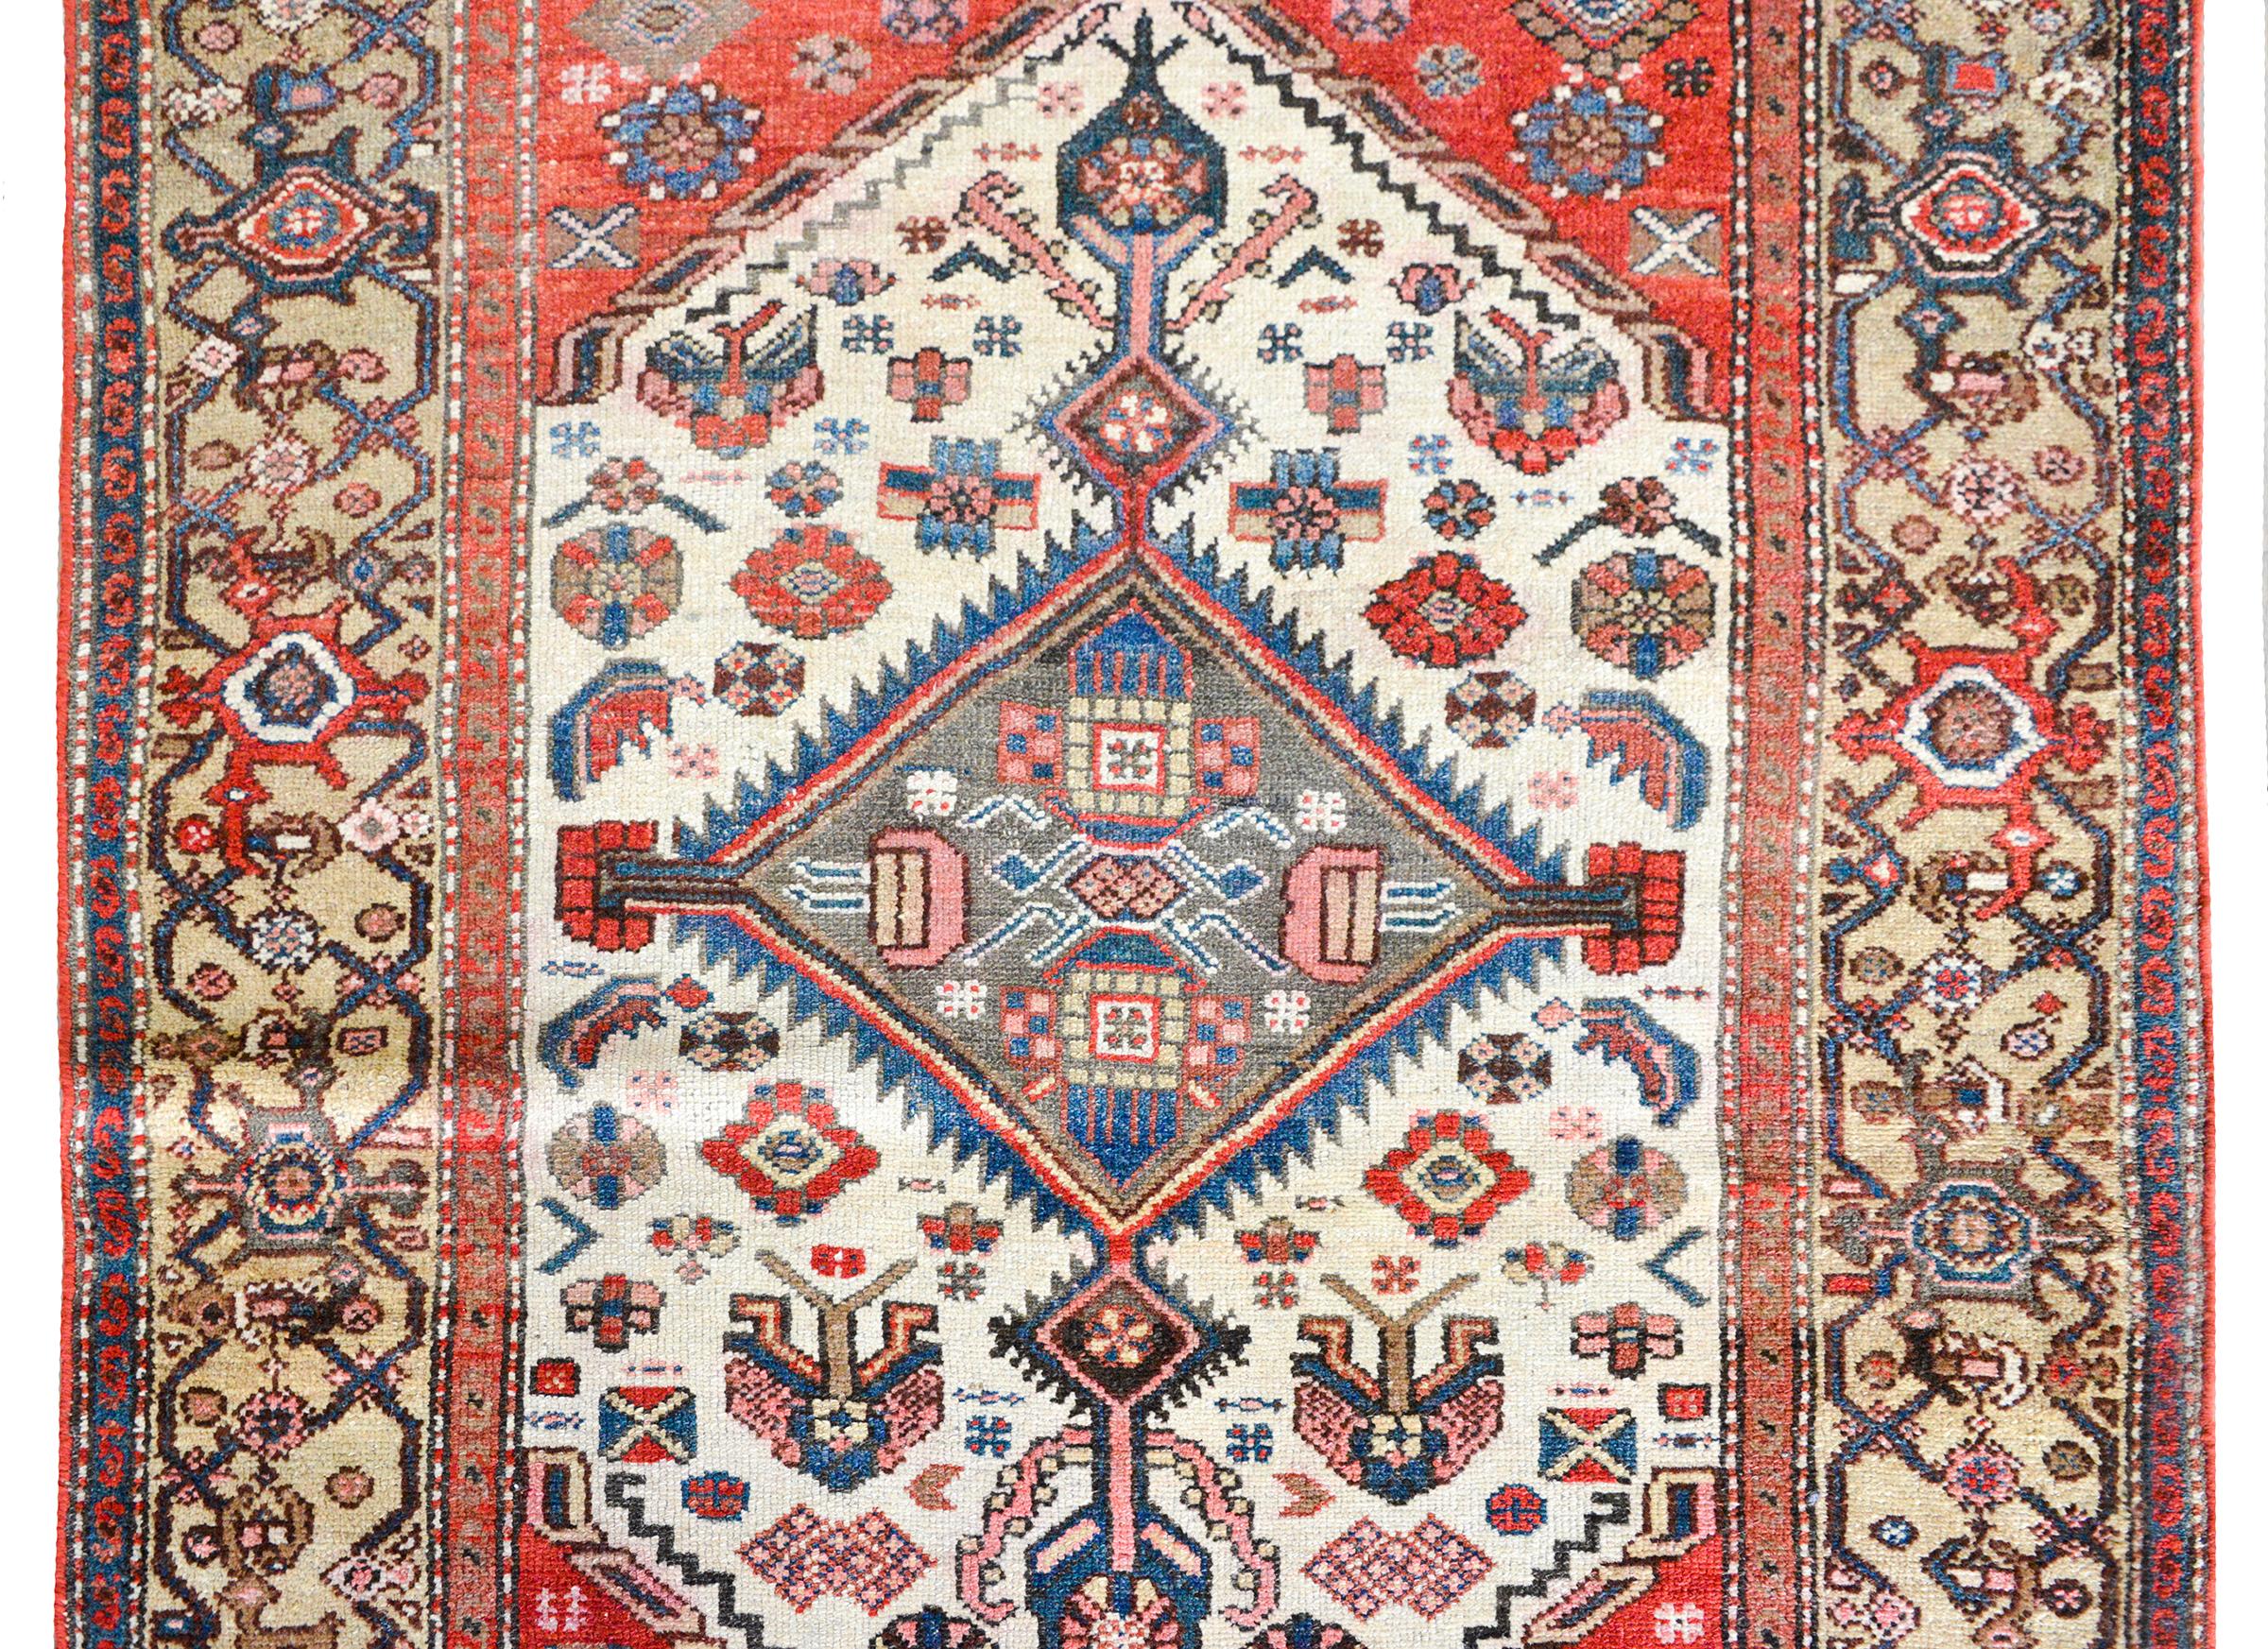 A wonderful early 20th century Persian Bakhtiari rug with a fantastic tribal pattern containing myriad stylized flowers, all woven in crimson, light and dark indigo, pink, and white, and surrounded by a wide stylized floral and scrolling vine